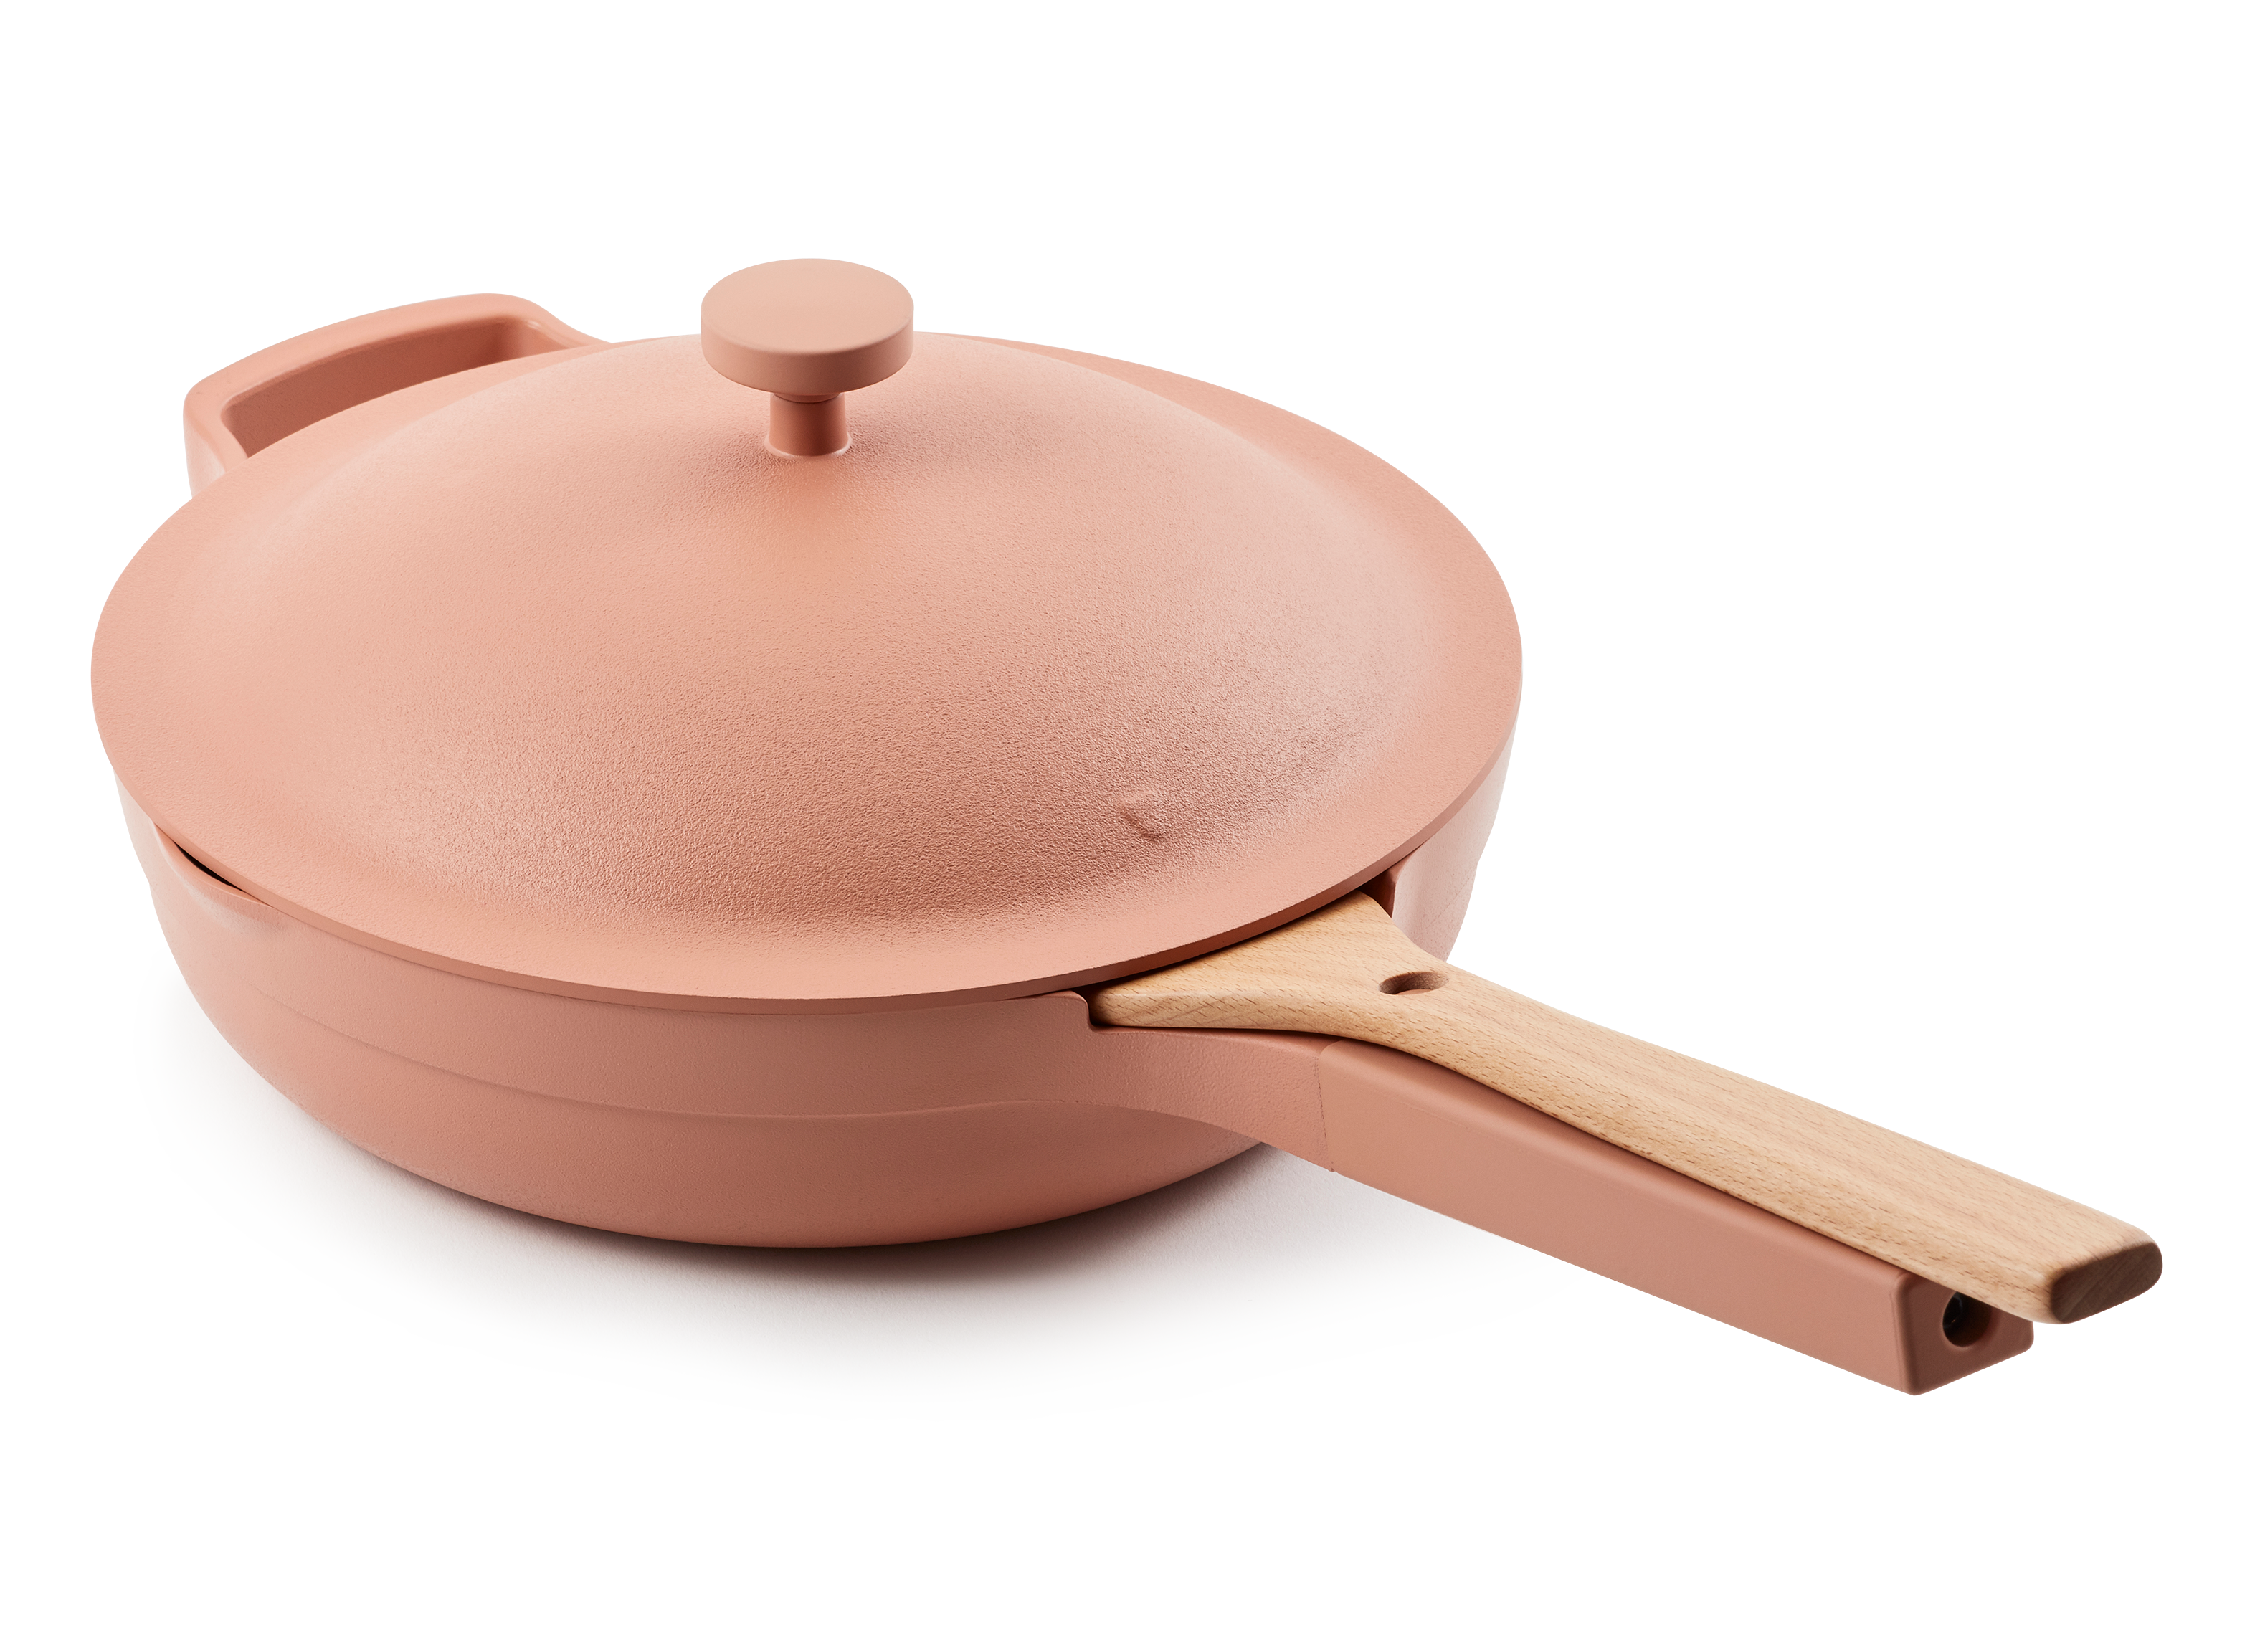 https://crdms.images.consumerreports.org/prod/products/cr/models/404701-frying-pans-nonstick-our-place-always-pan-10024294.png